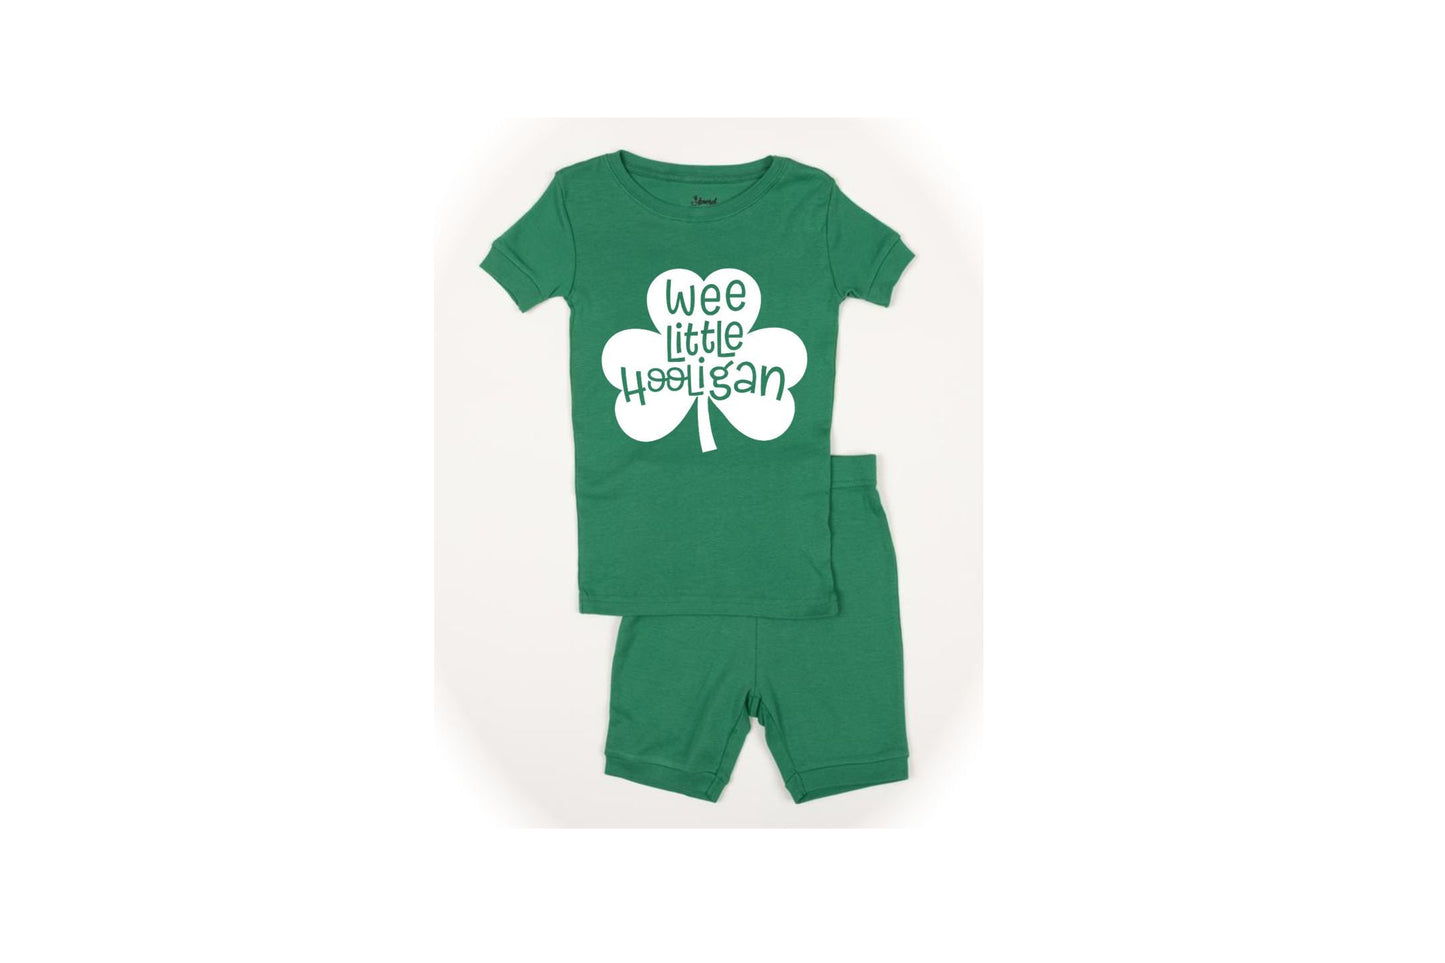 Wee Little Hooligan Shorts St Patrick's Day Pajamas - Kids St Patty's Pajamas - Kids St Paddy's Pajamas - Green Pajamas for St Patty's